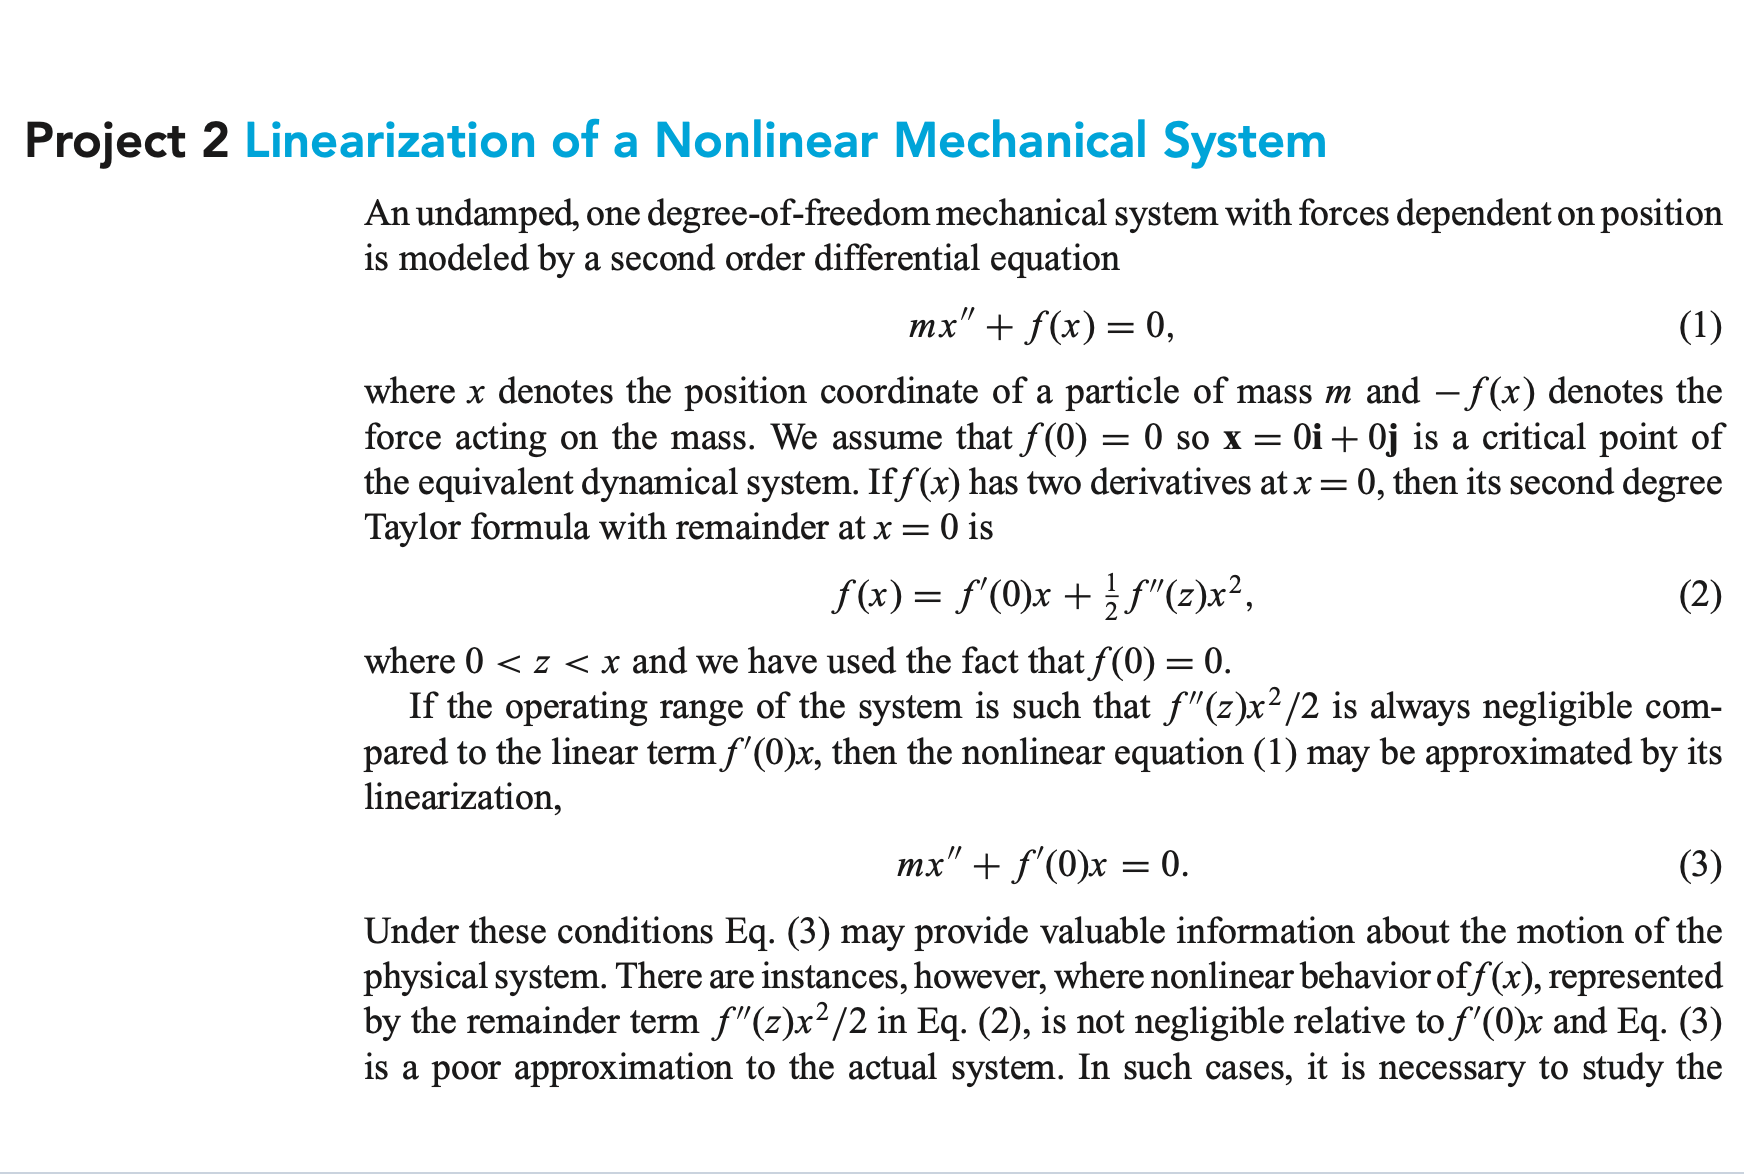 Project 2 Linearization of a Nonlinear Mechanical System
An undamped, one degree-of-freedom mechanical system with forces dependent on position
is modeled by a second order differential equation
тx" + f(x) — 0,
(1)
where x denotes the position coordinate of a particle of mass m and - f(x) denotes the
force acting on the mass. We assume that f(0)
the equivalent dynamical system. Iff(x) has two derivatives at x = 0, then its second degree
Taylor formula with remainder at x = 0 is
= 0 so x = 0i + 0j is a critical point of
f(x) = f'(0)x + f"(z)x²,
(2)
where 0 < z < x and we have used the fact that f(0) = 0.
If the operating range of the system is such that f"(z)x²/2 is always negligible com-
pared to the linear term f'(0)x, then the nonlinear equation (1) may be approximated by its
linearization,
mx" + f'(0)x = 0.
(3)
Under these conditions Eq. (3) may provide valuable information about the motion of the
physical system. There are instances, however, where nonlinear behaviorof f(x), represented
by the remainder term f"(z)x²/2 in Eq. (2), is not negligible relative to f'(0)x and Eq. (3)
is a poor approximation to the actual system. In such cases, it is necessary to study the
